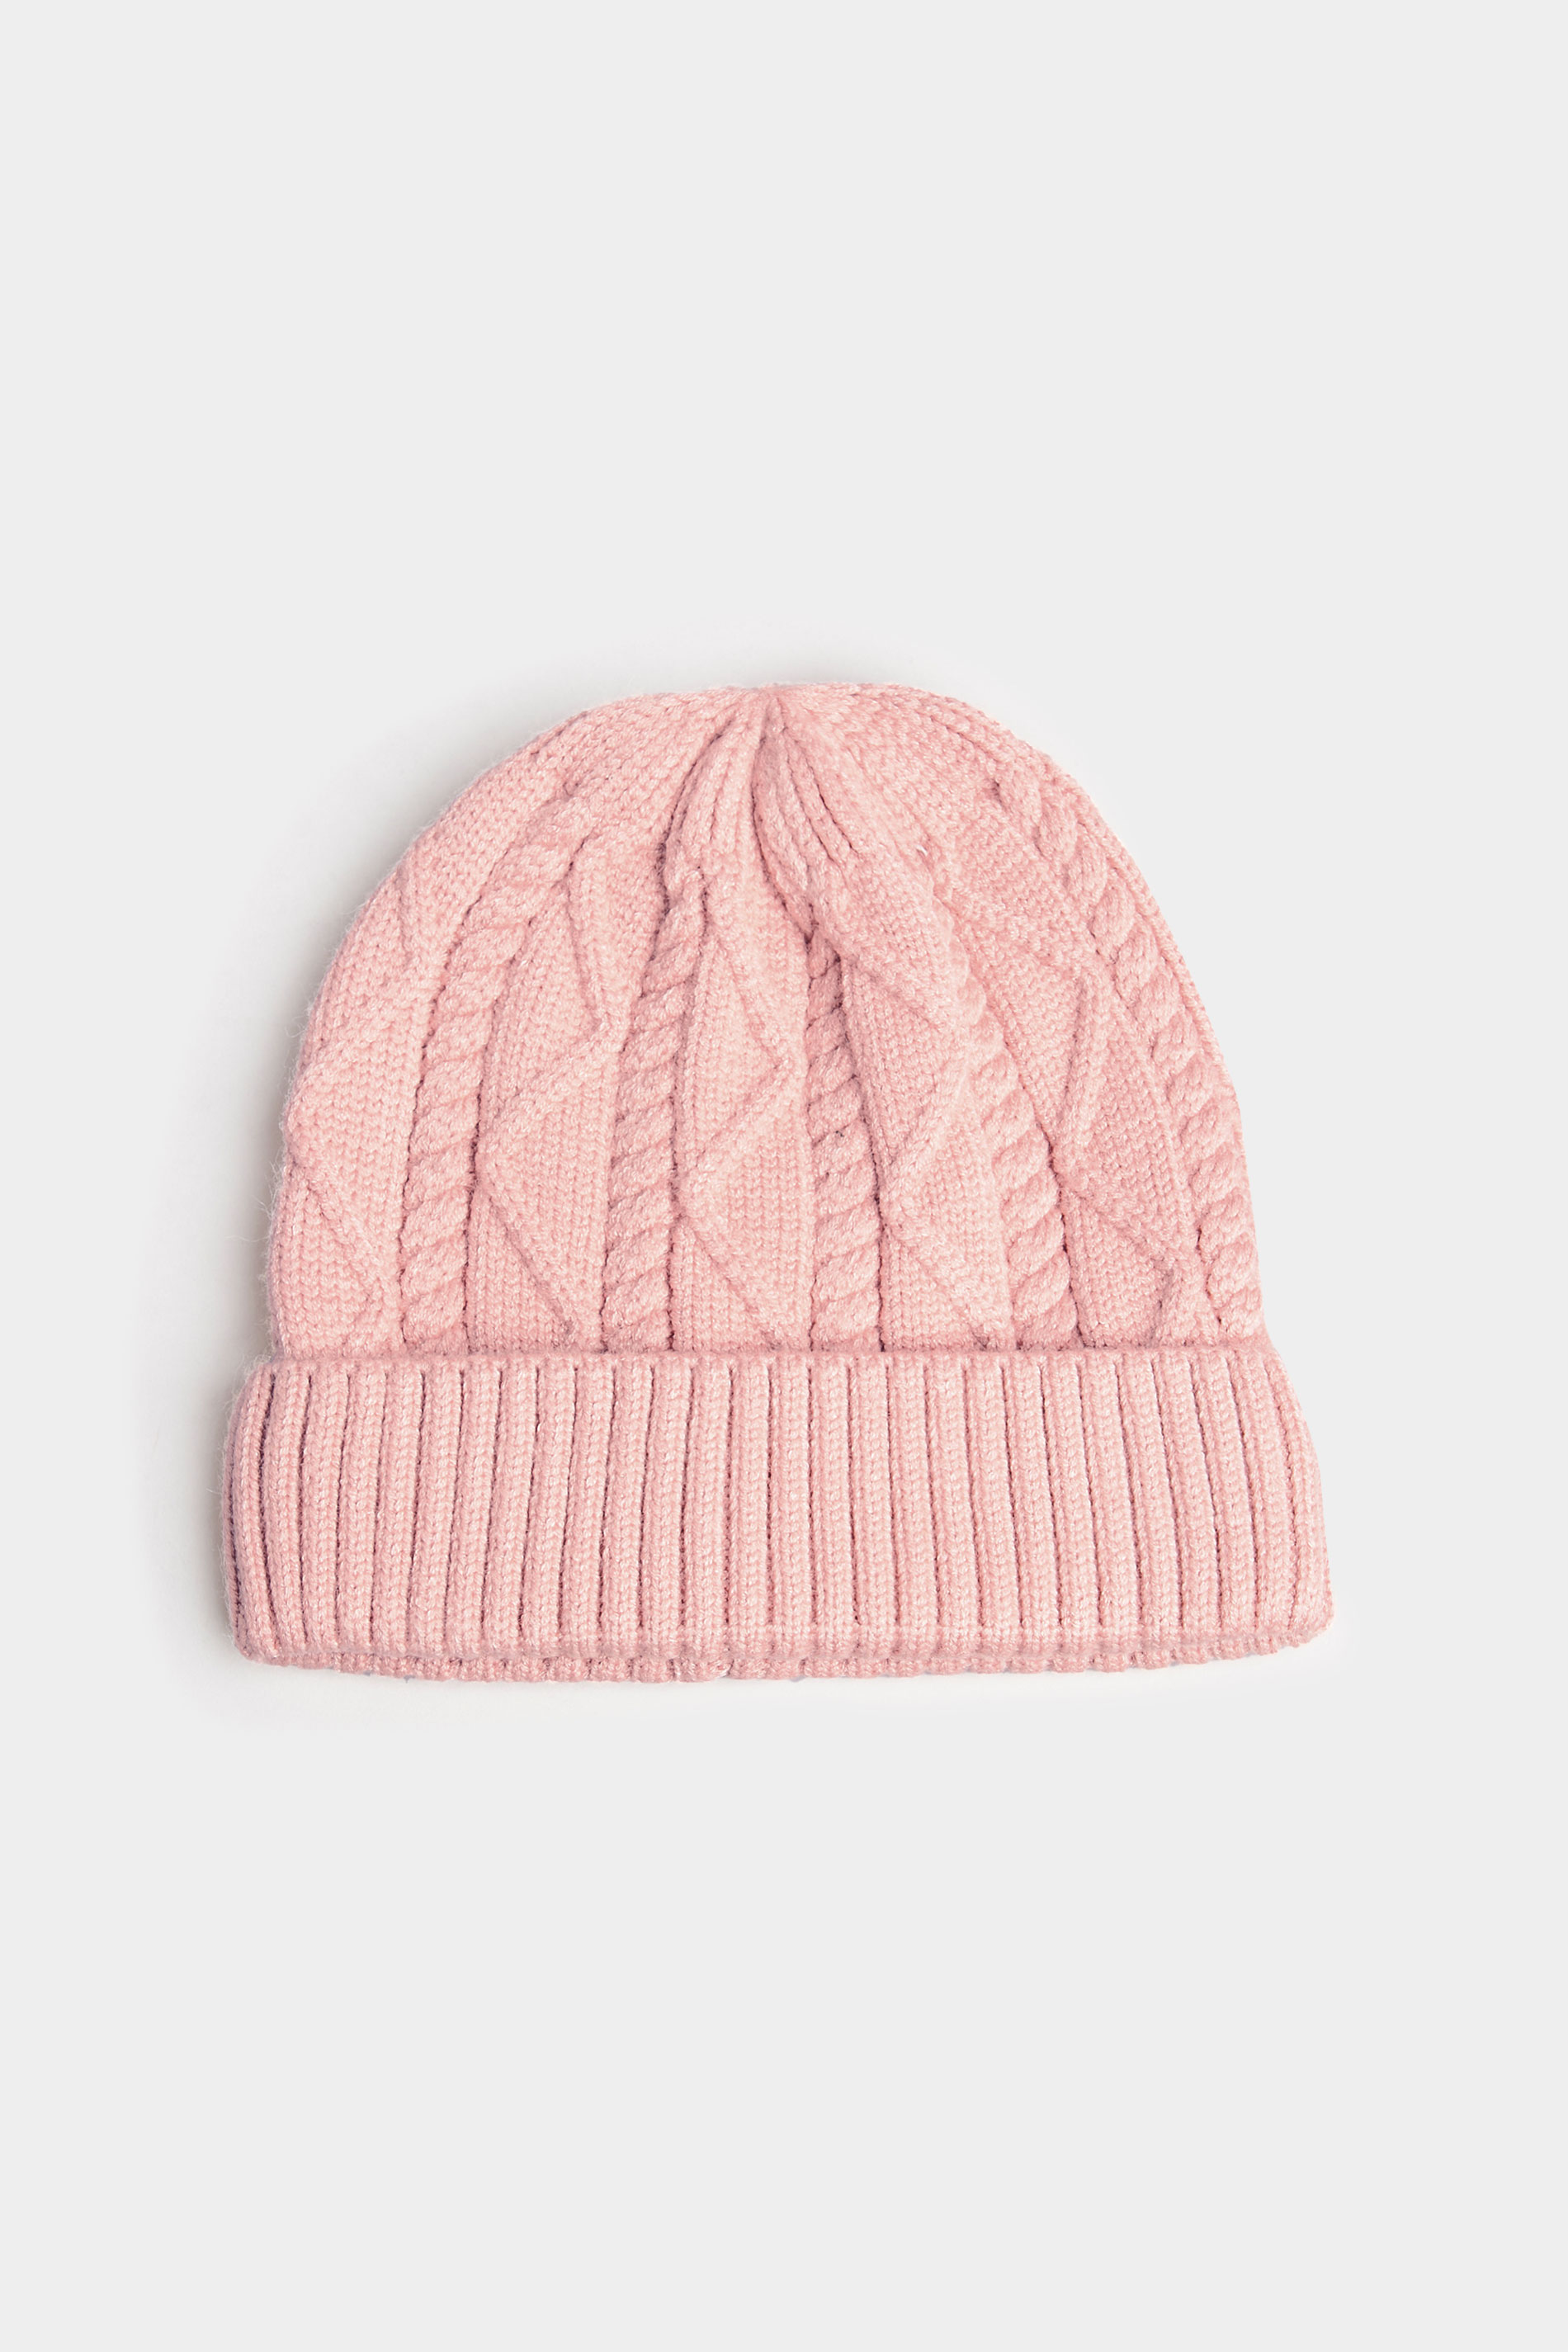 Pink Cable Knitted Beanie Hat 1